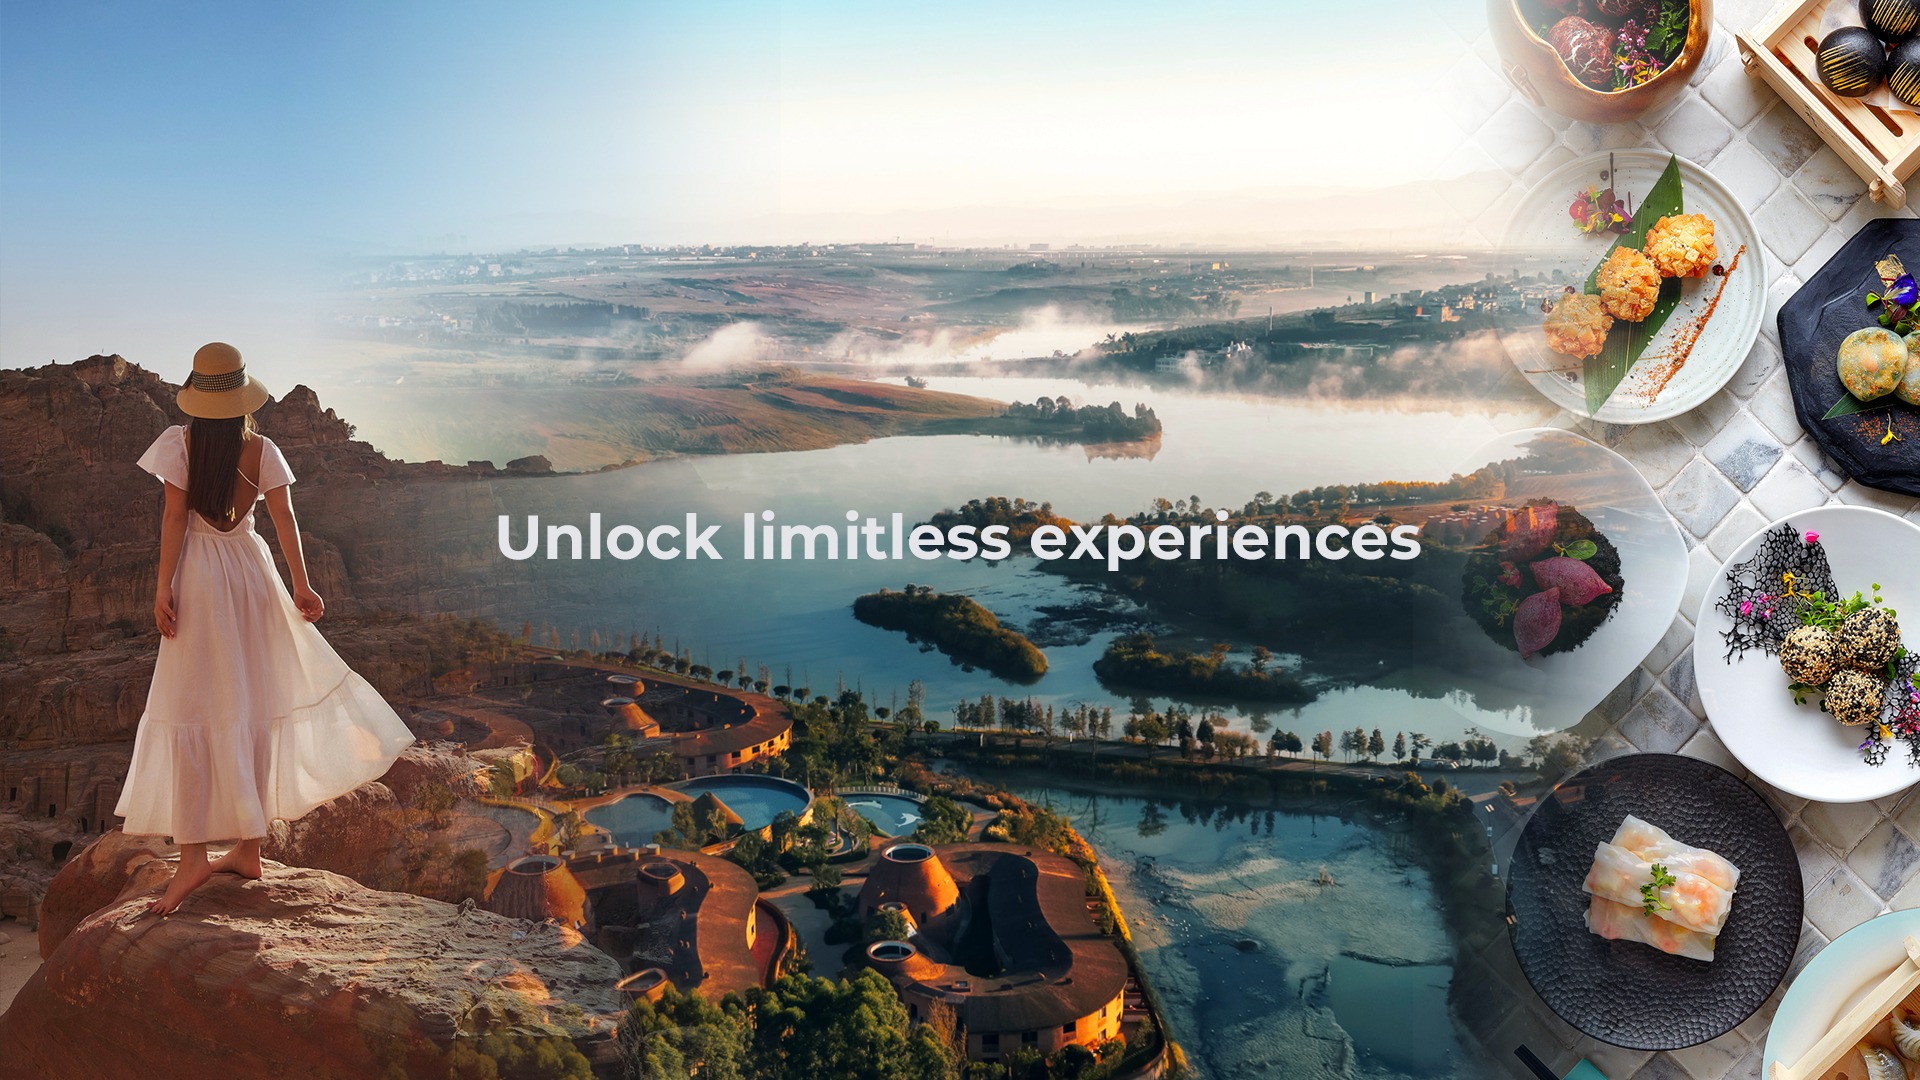 Shh, Book and enjoy up to 25% OFF stays on the best holiday of ALL(Accor Live Limitless)